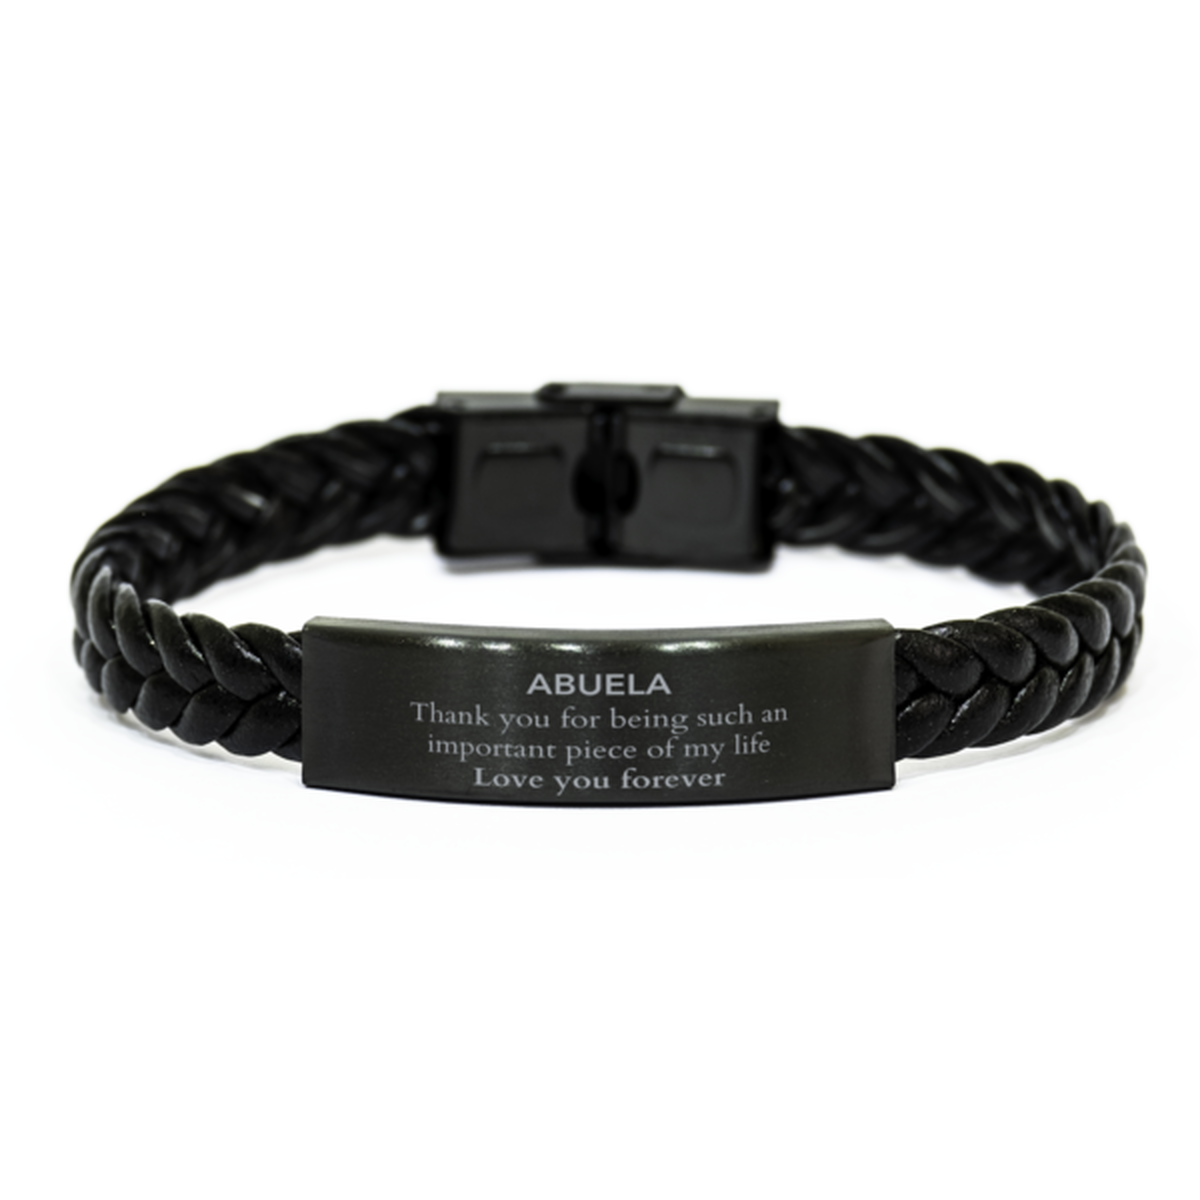 Appropriate Abuela Braided Leather Bracelet Epic Birthday Gifts for Abuela Thank you for being such an important piece of my life Abuela Christmas Mothers Fathers Day